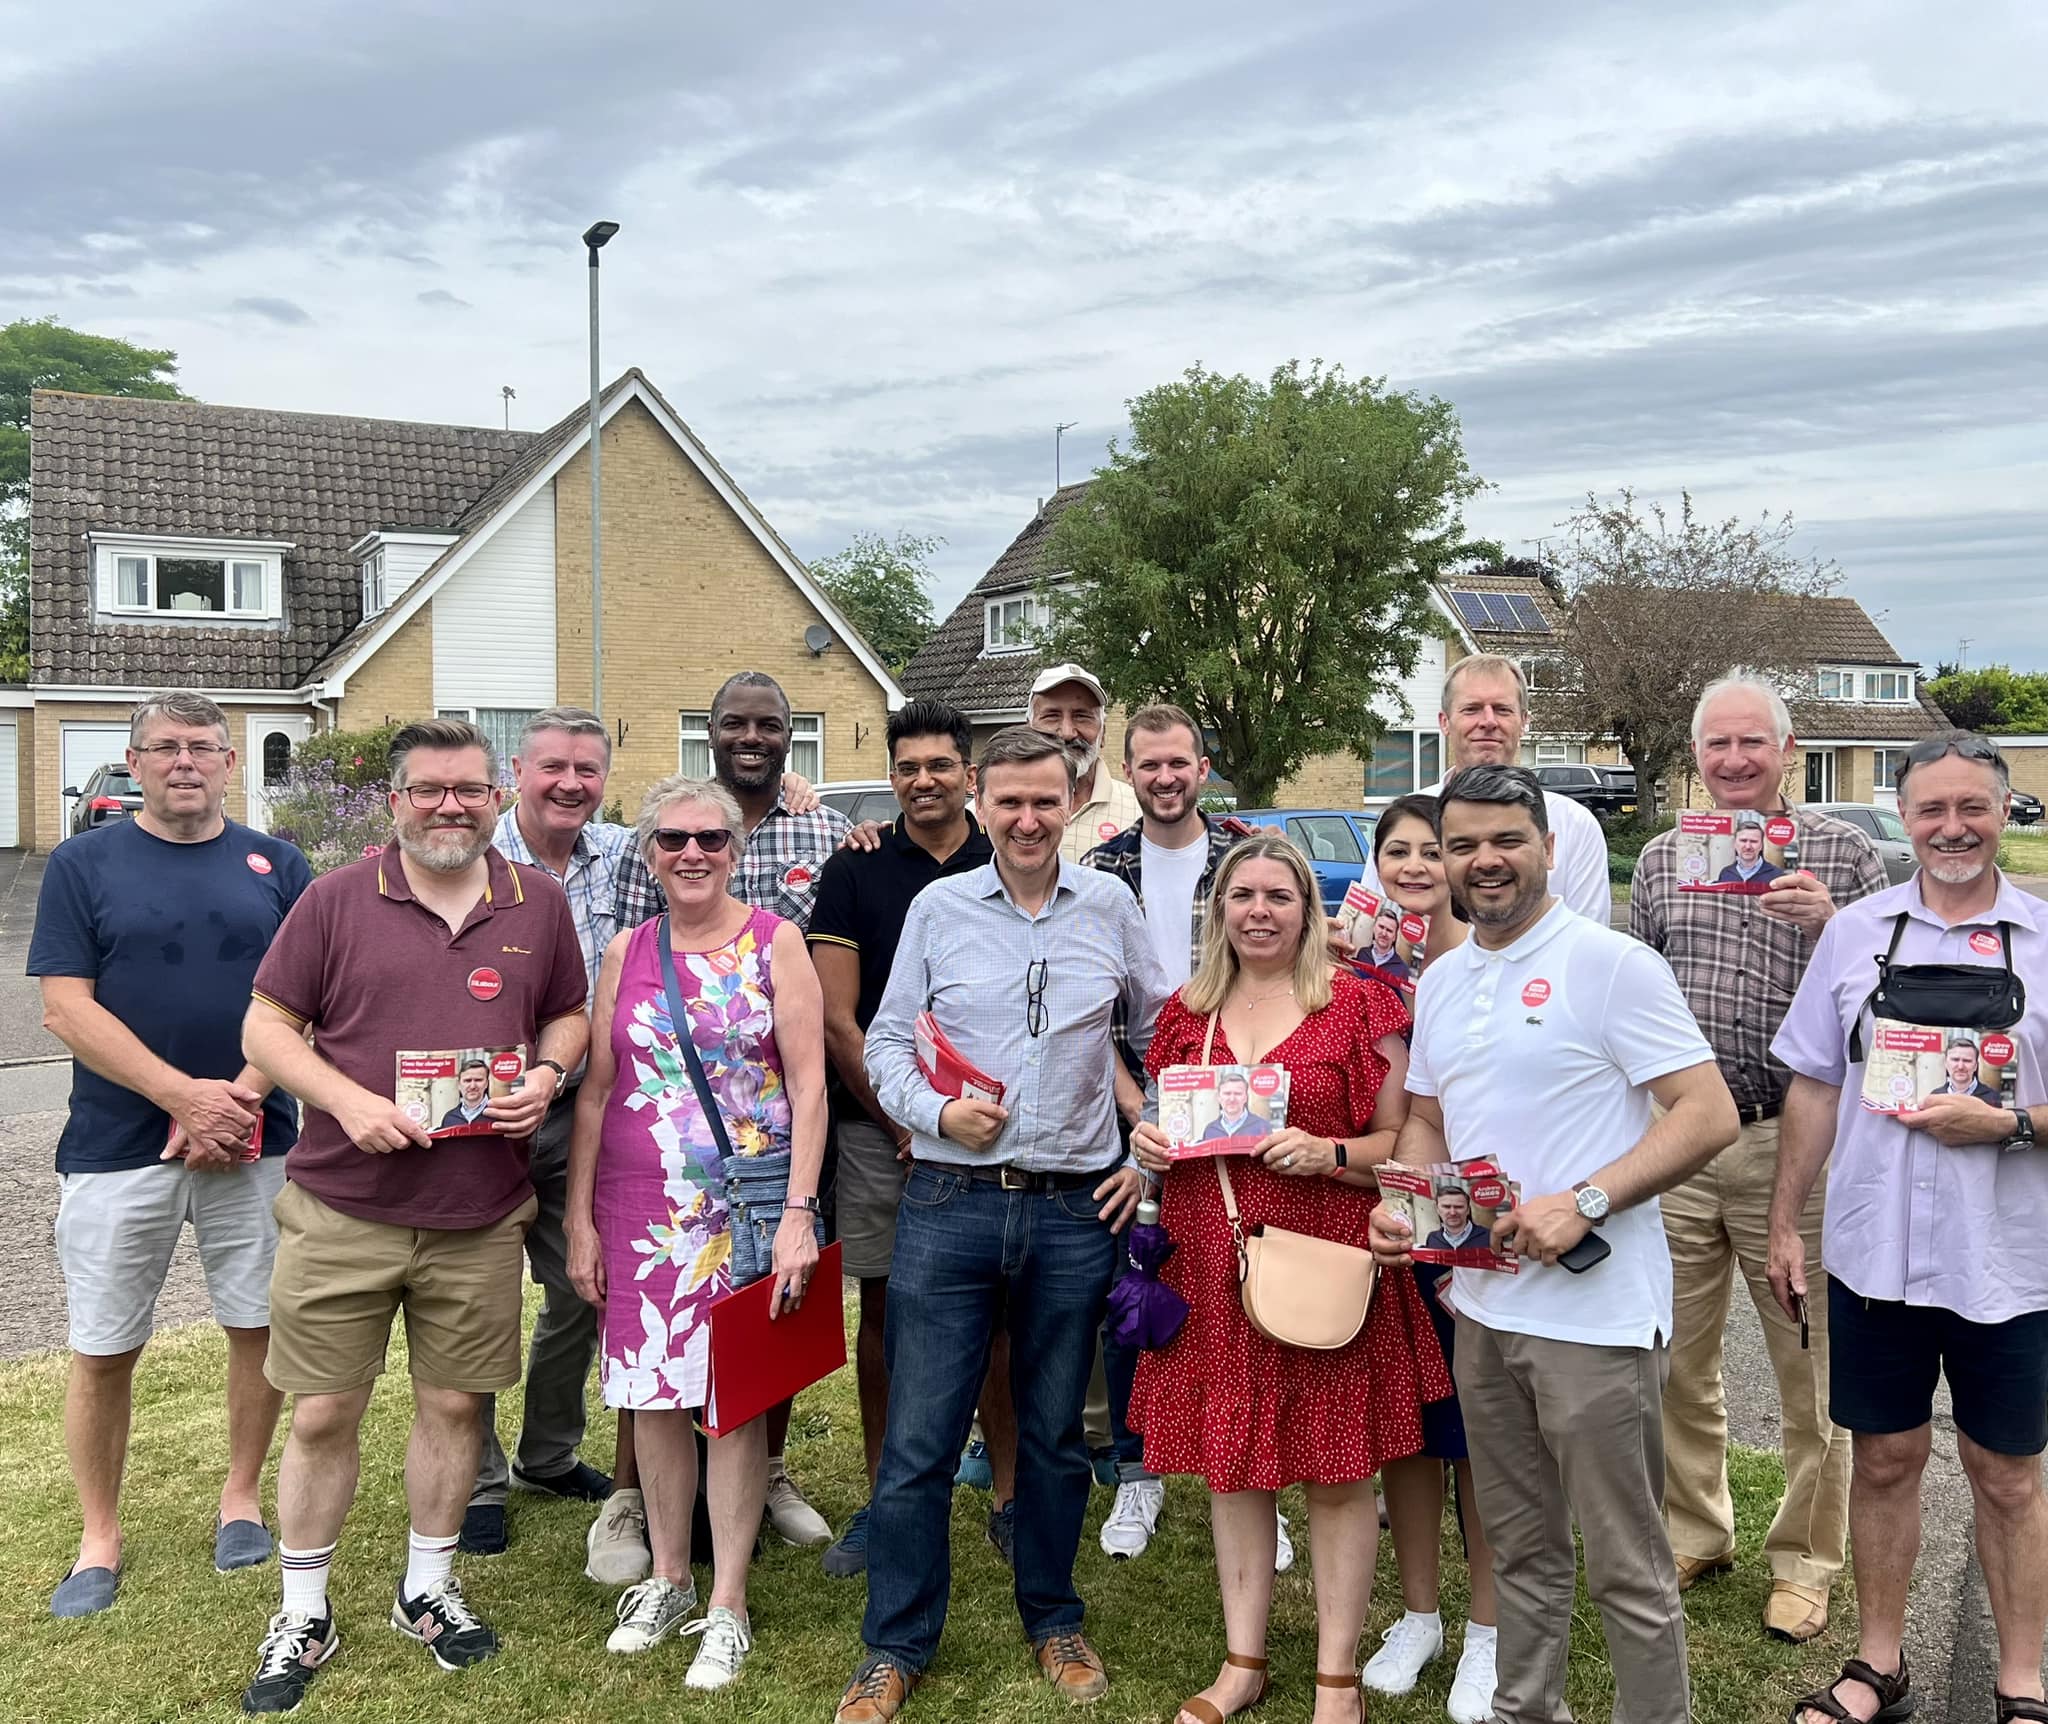 Labour Party members out in the city in July with MP Daniel Zeichner from Cambridge and Andrew Pakes, the Parliamentary candidate for Peterborough.